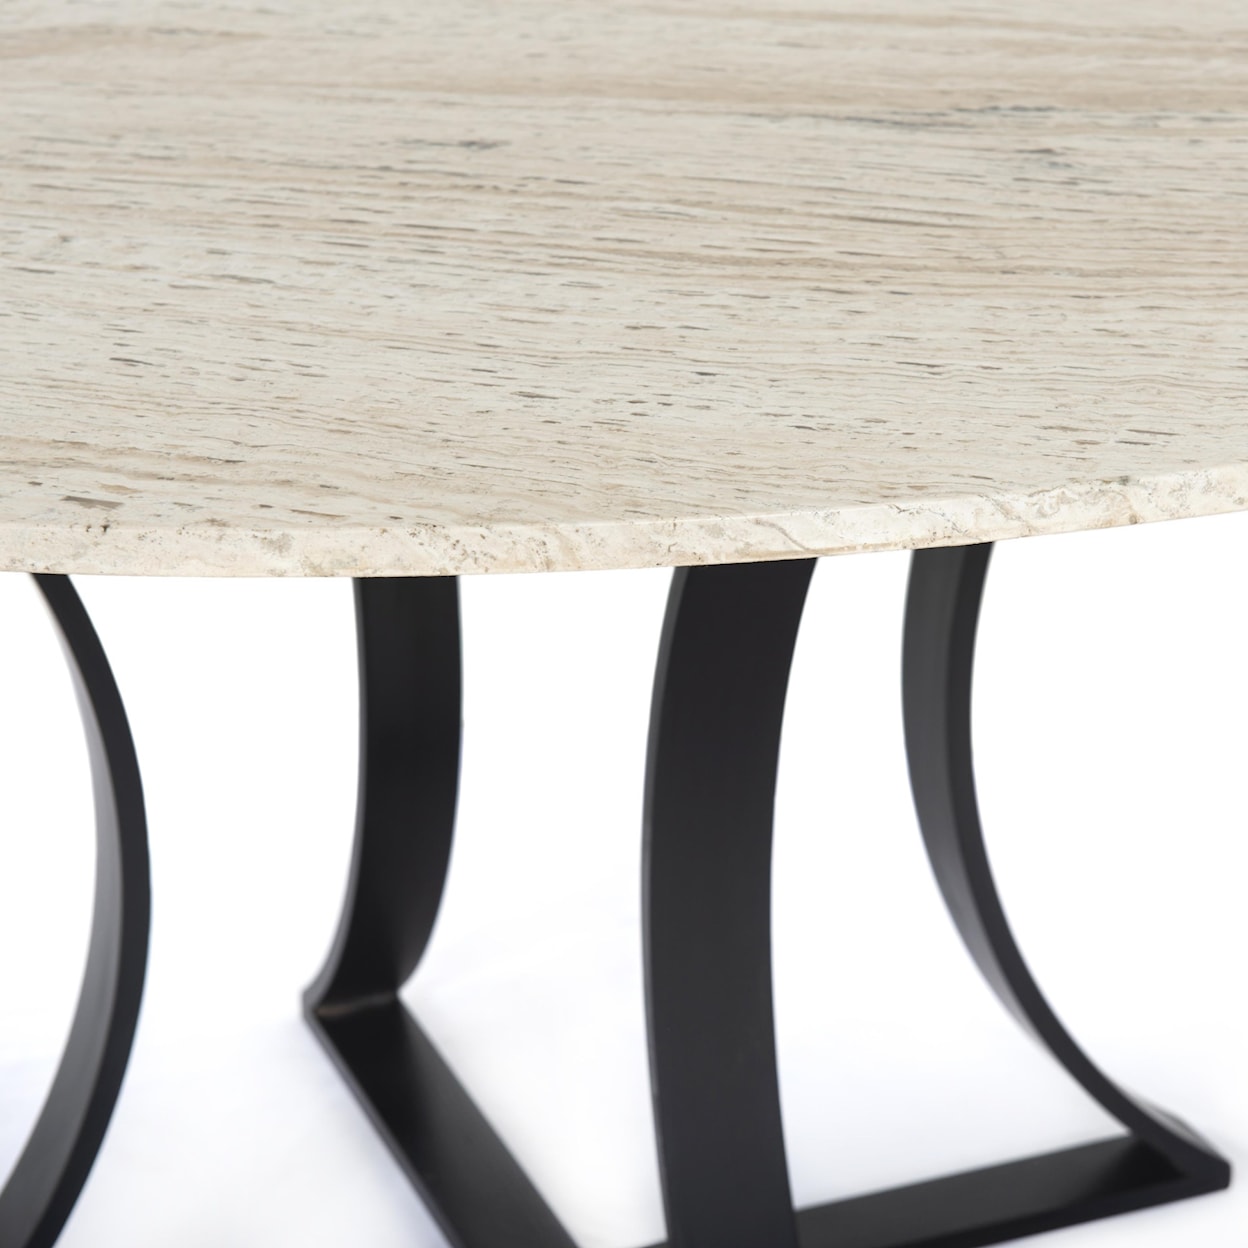 Four Hands Rockwell Gage Dining Table